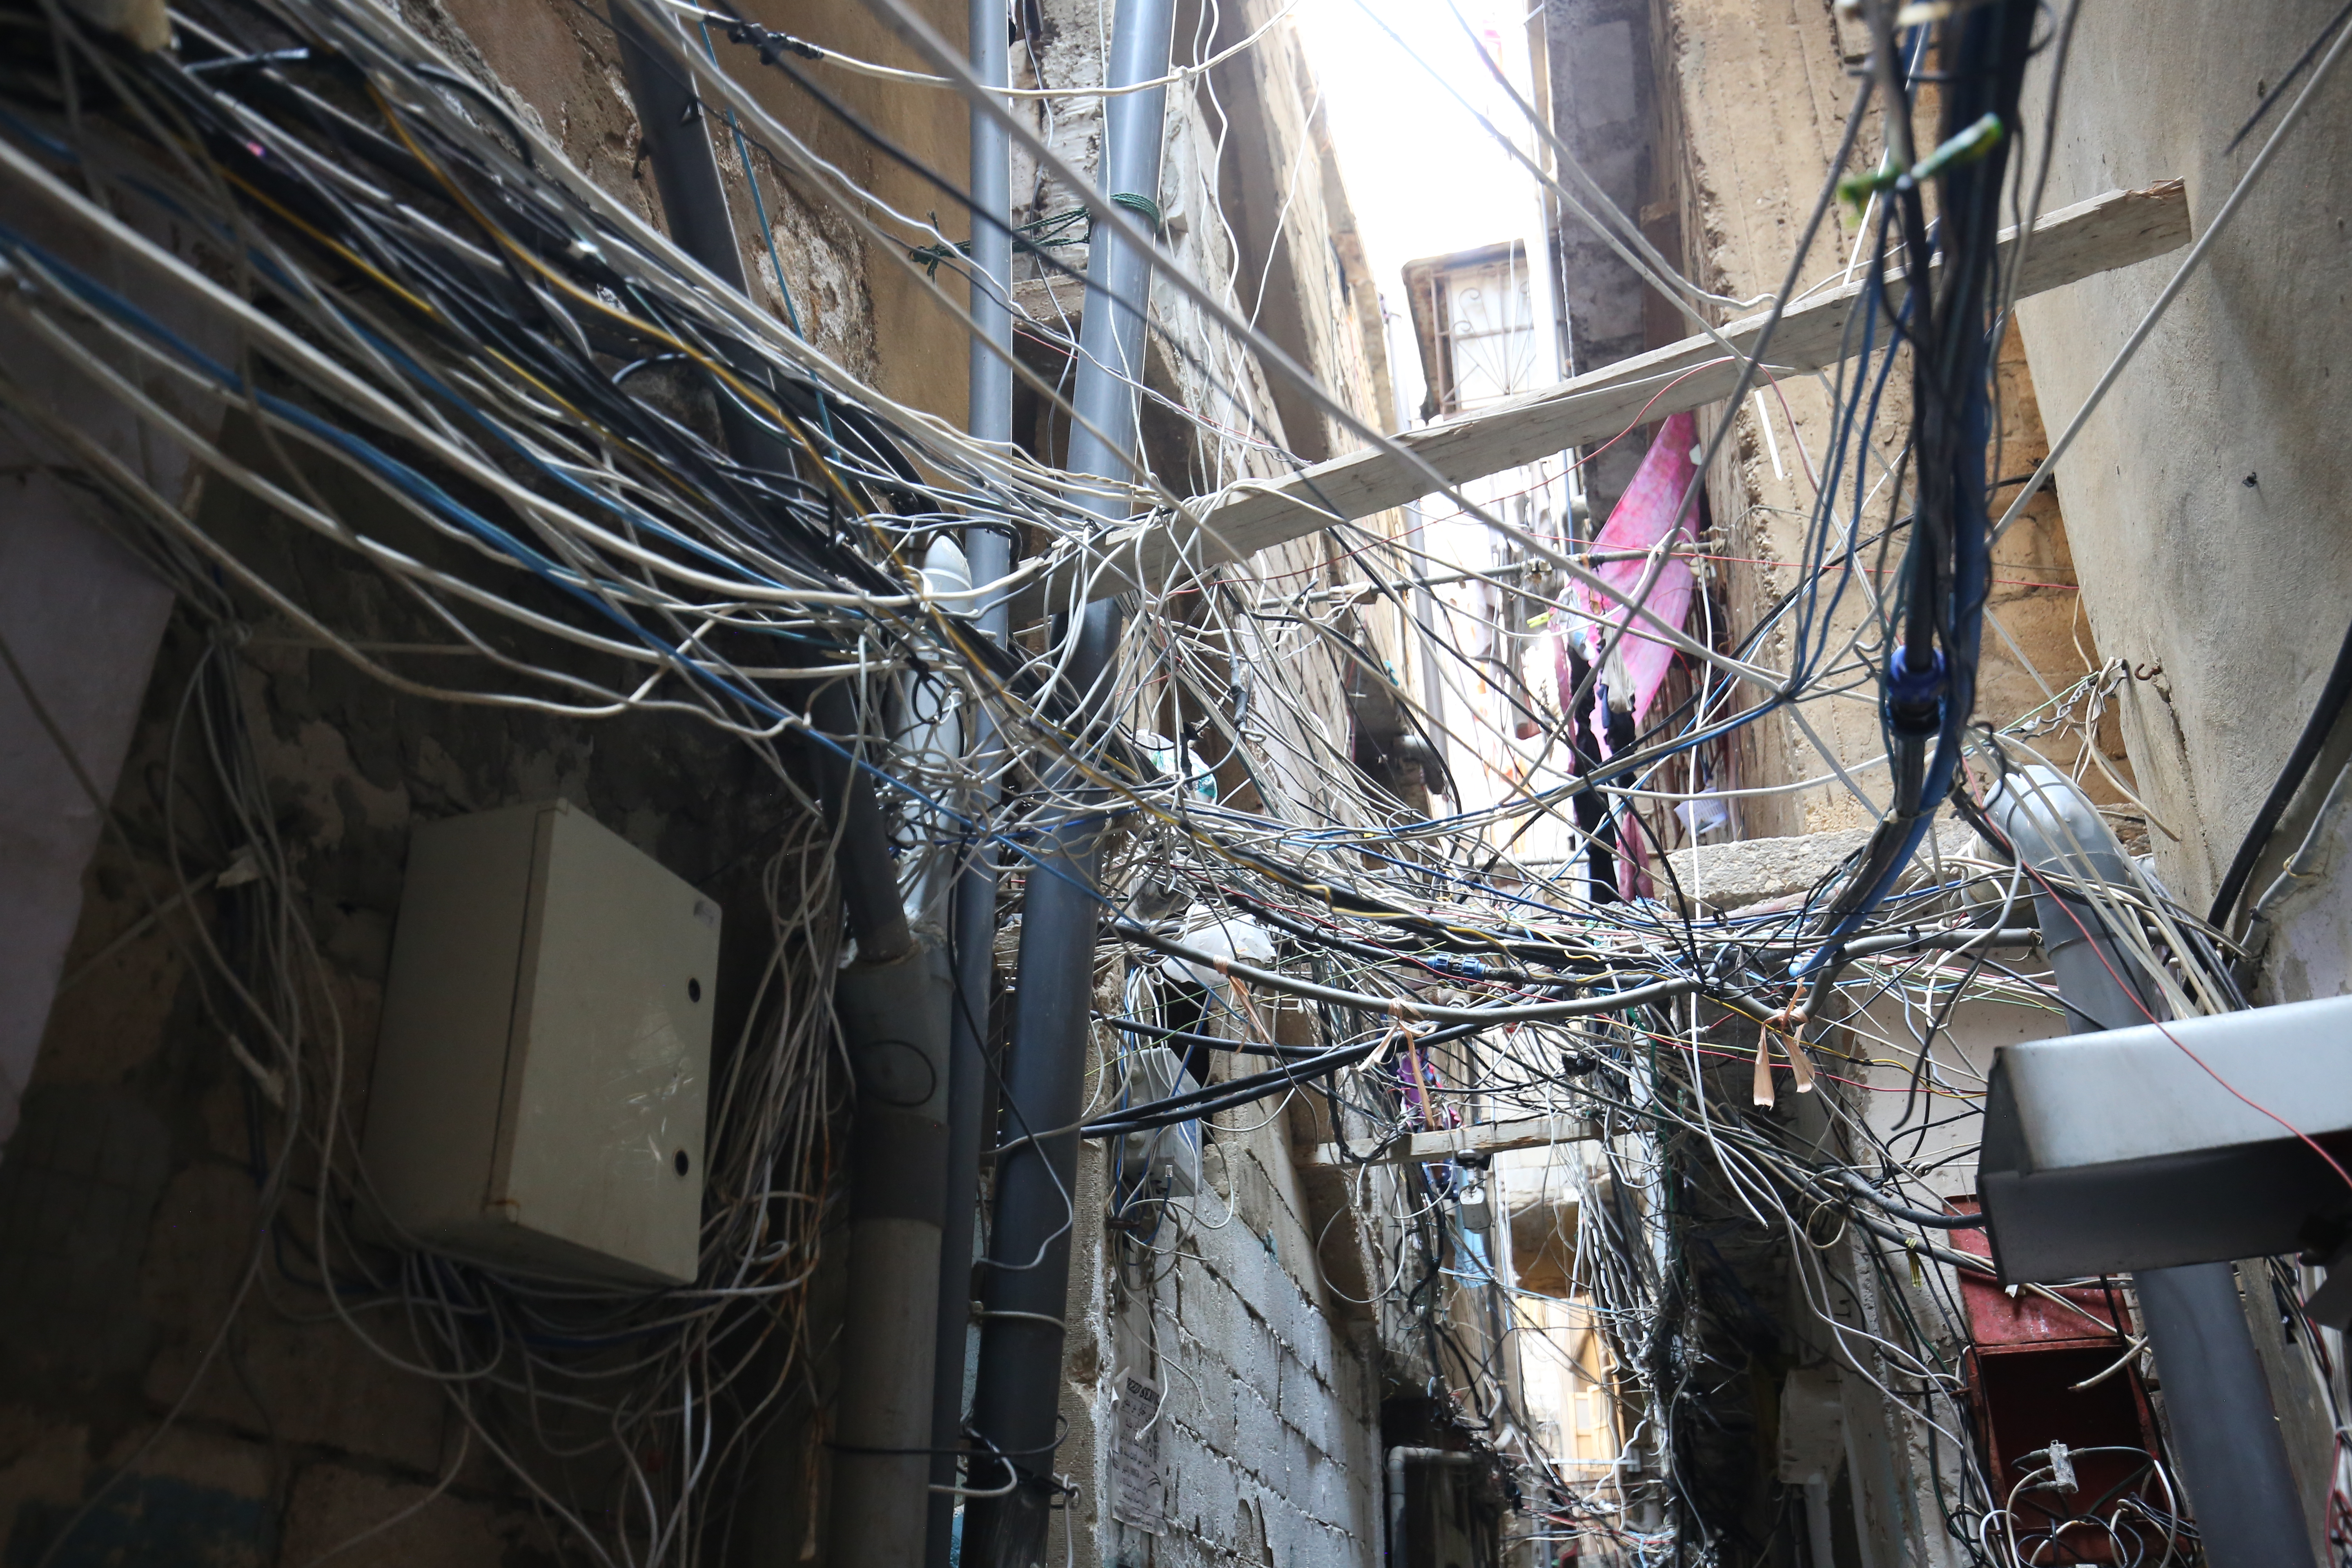 Risk of random electrical wires